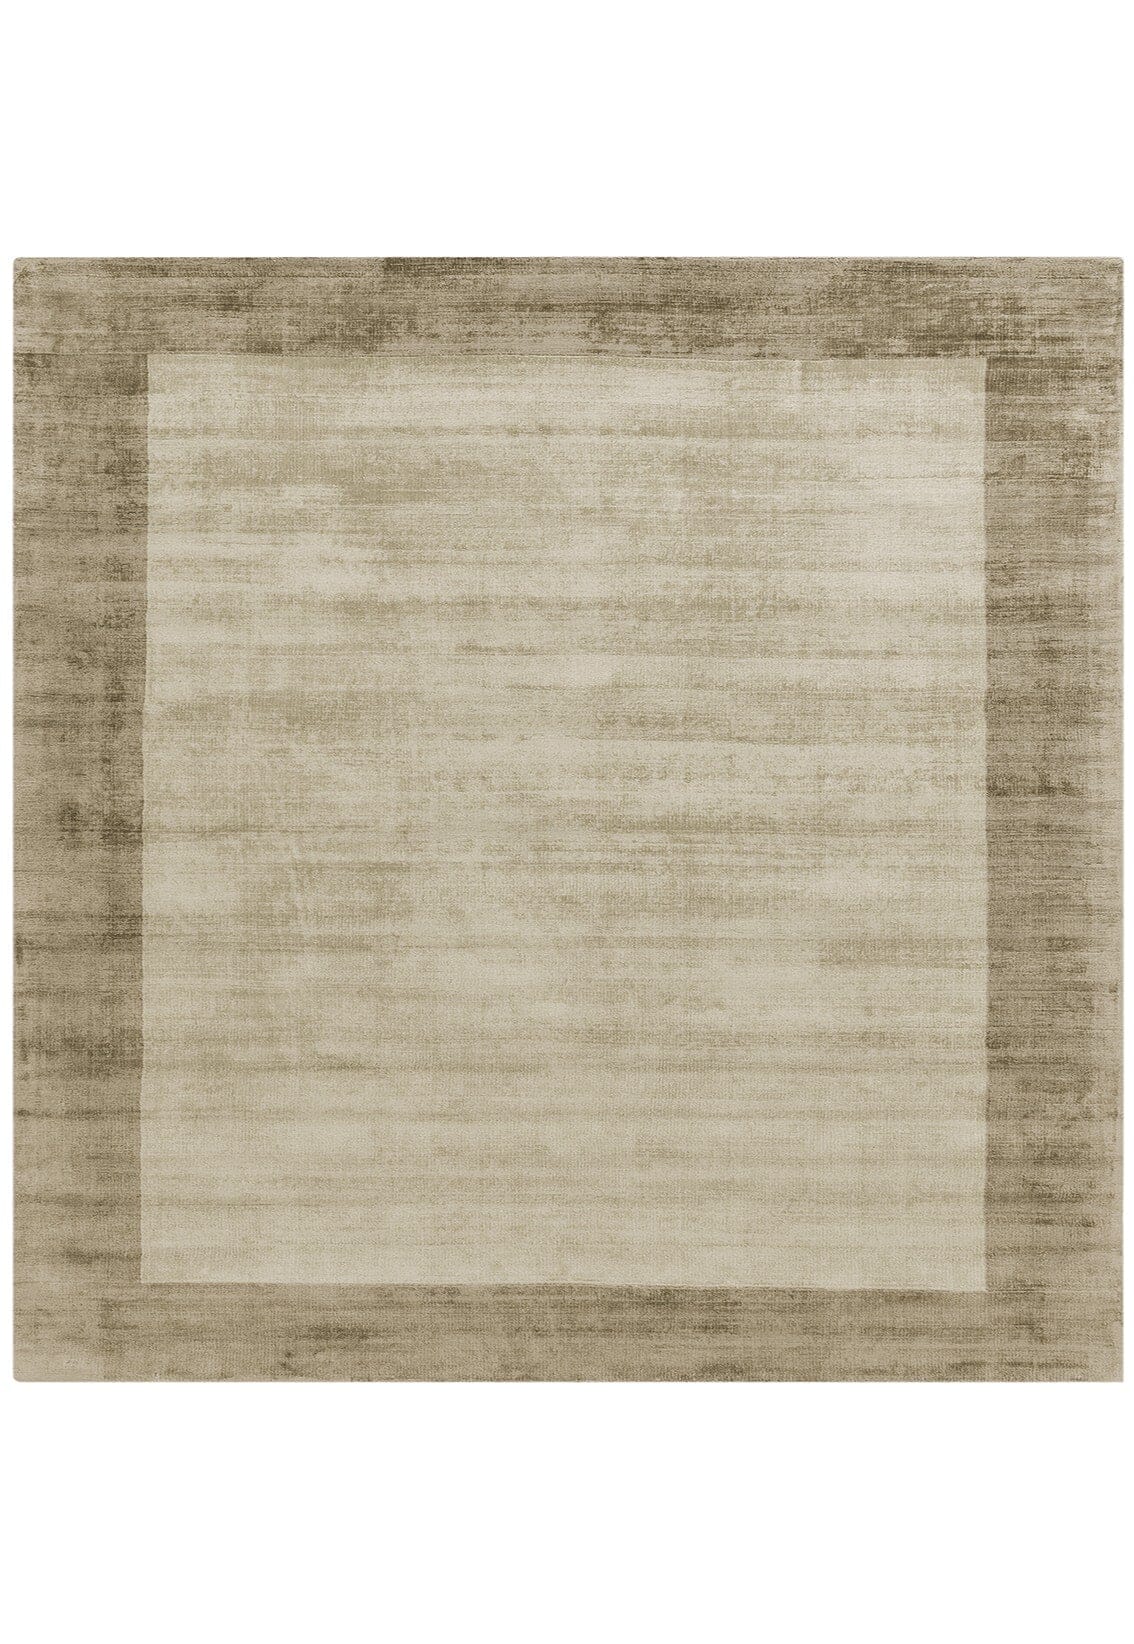 Asiatic Carpets Blade Hand Woven Rug Smoke Putty - 120 x 170cm